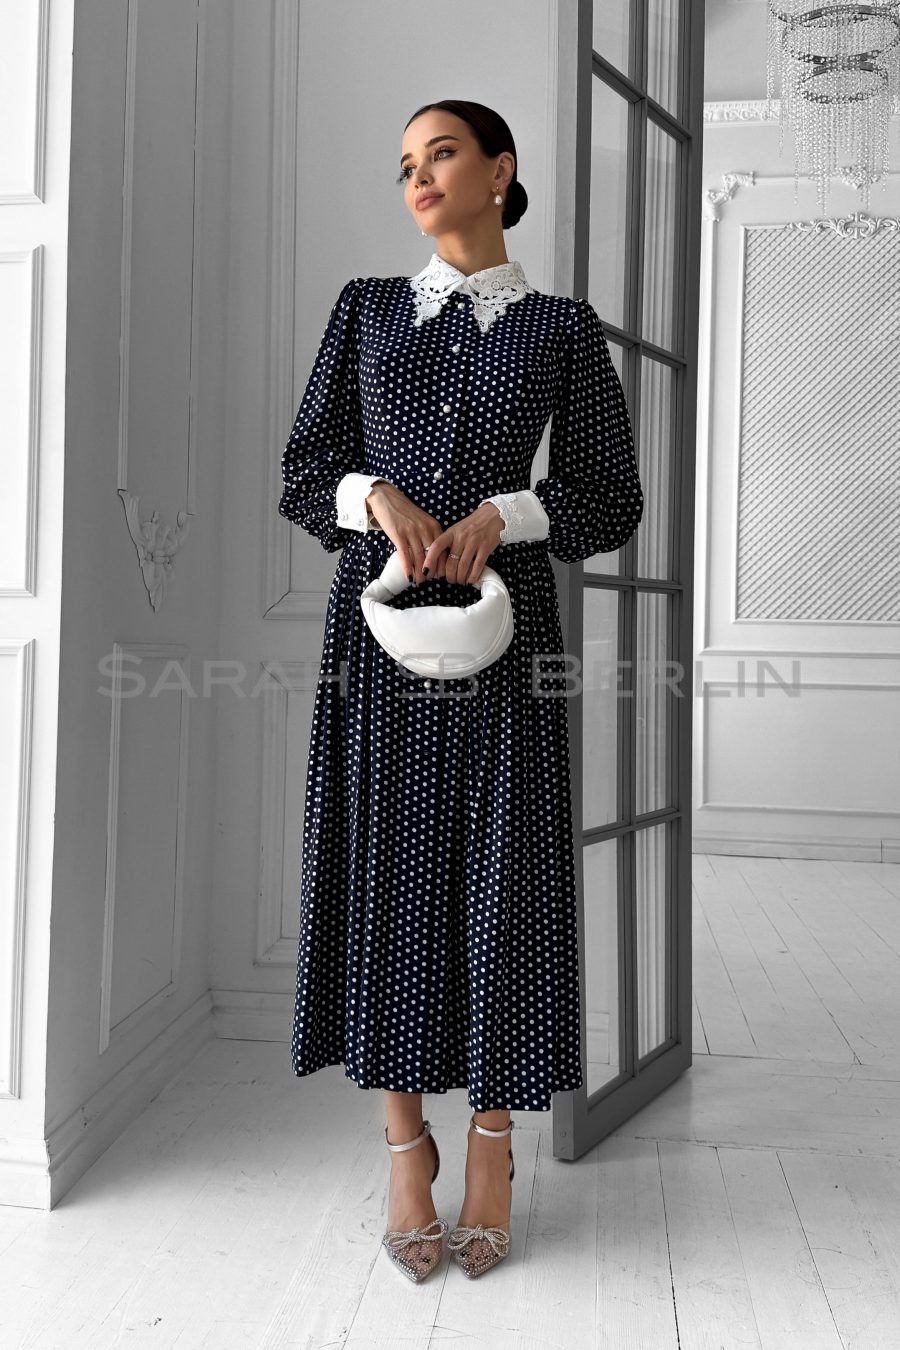 Polka dot viscose dress with white collar and cuffs